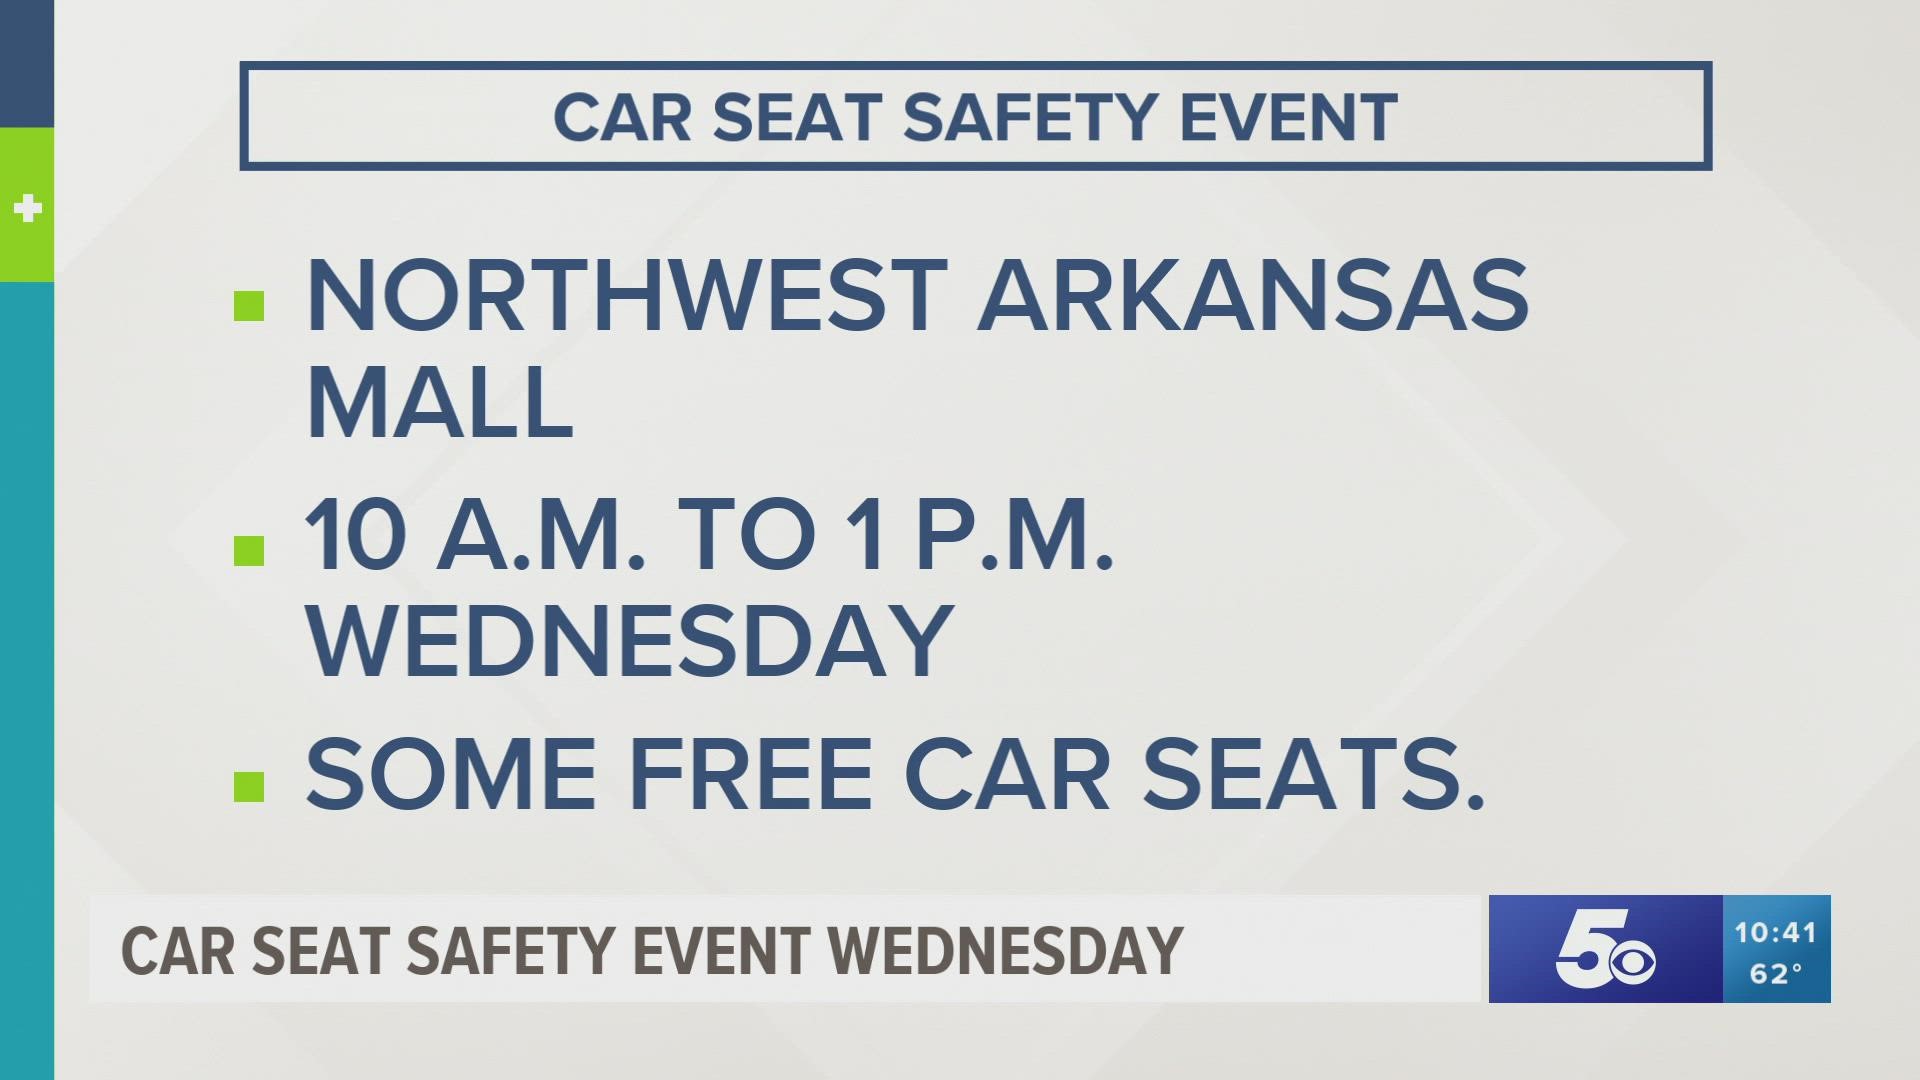 Car seat installation checks will be held from 9 a.m. to 1 p.m. and those in need of a car seat can get a free one from 10 a.m. to 1 p.m. or until supplies last.